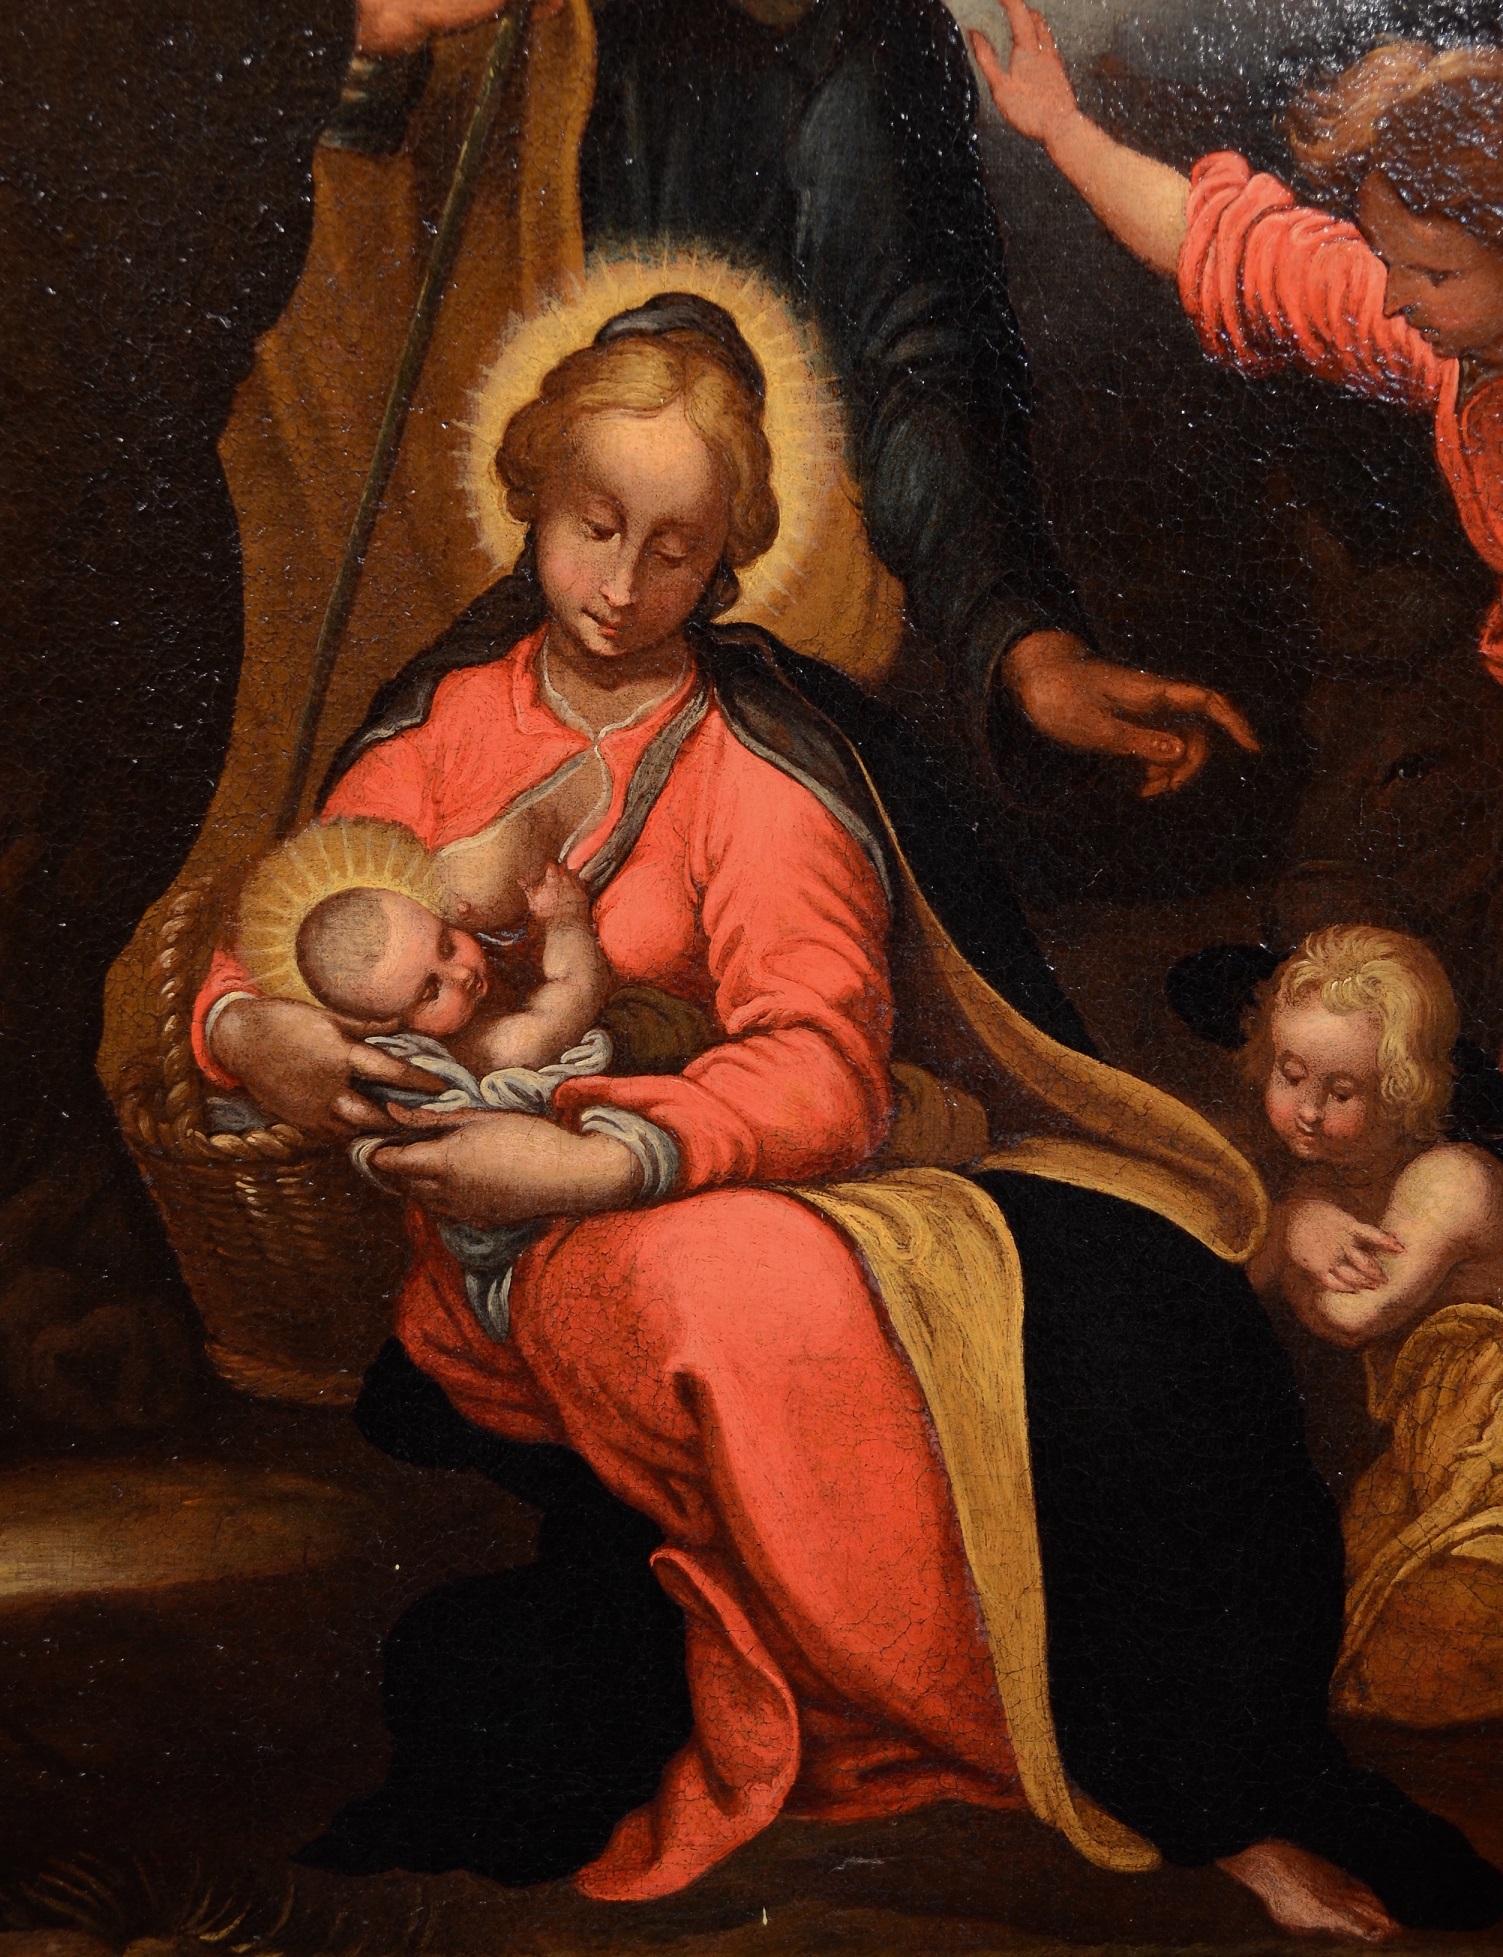 Holy Family Paint Oil on canvas Old master 17th Century Roma school Italy Art - Old Masters Painting by Unknown